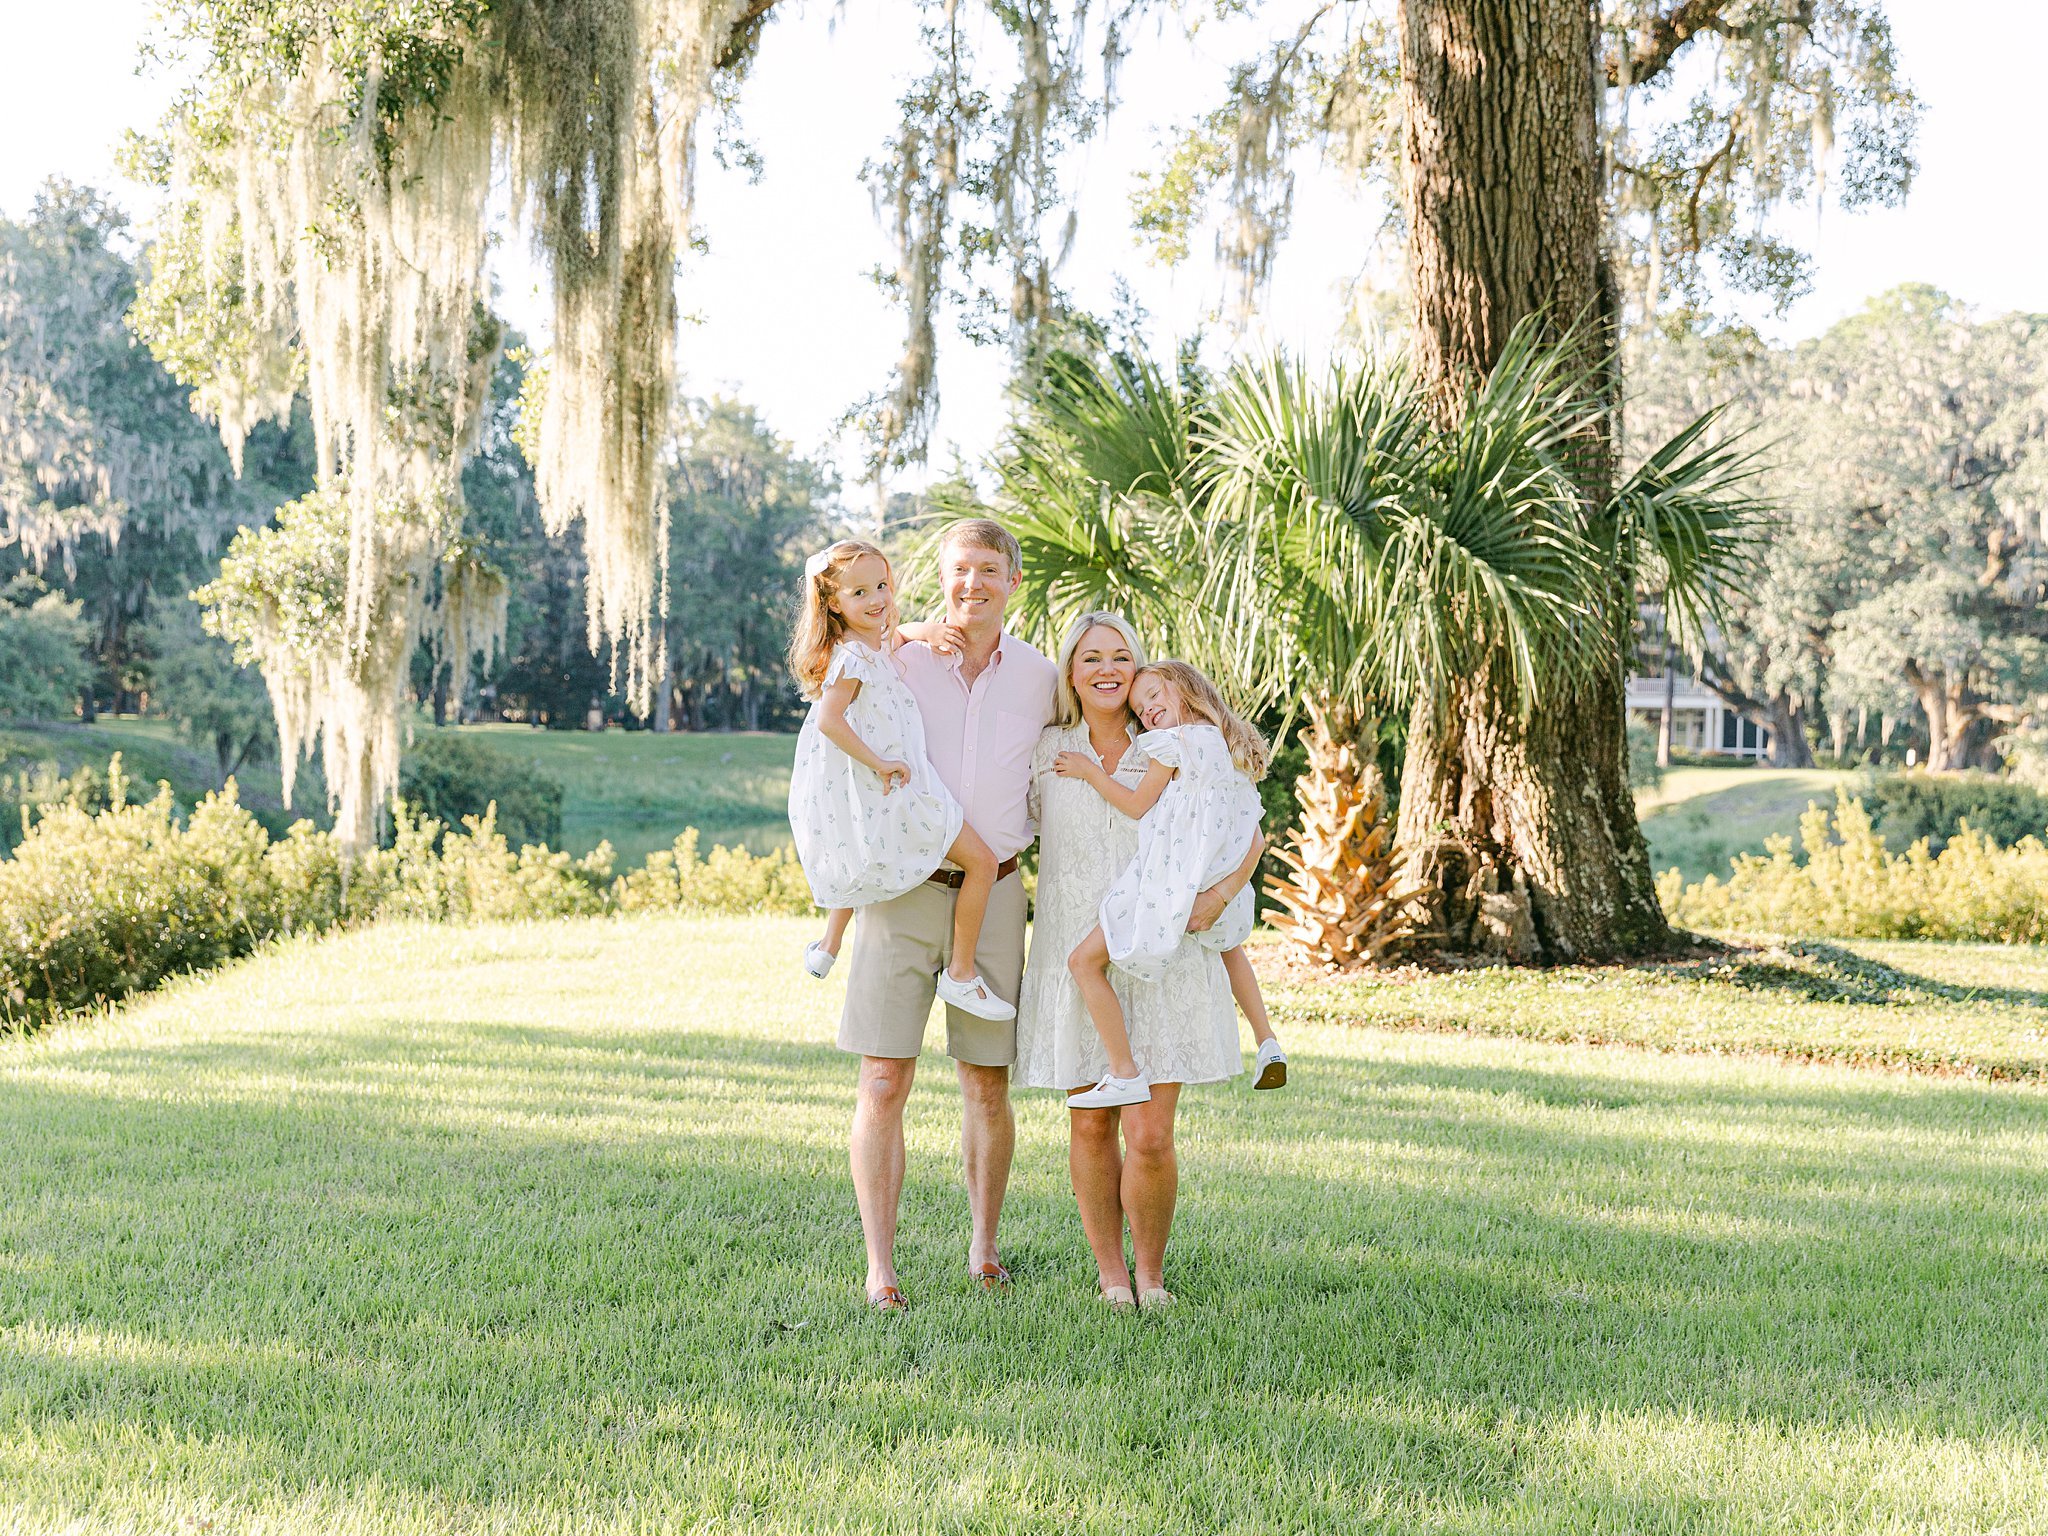 Katherine_Ives_Photography_sansing_Family_Montage_palmetto_Bluff_6651.JPG